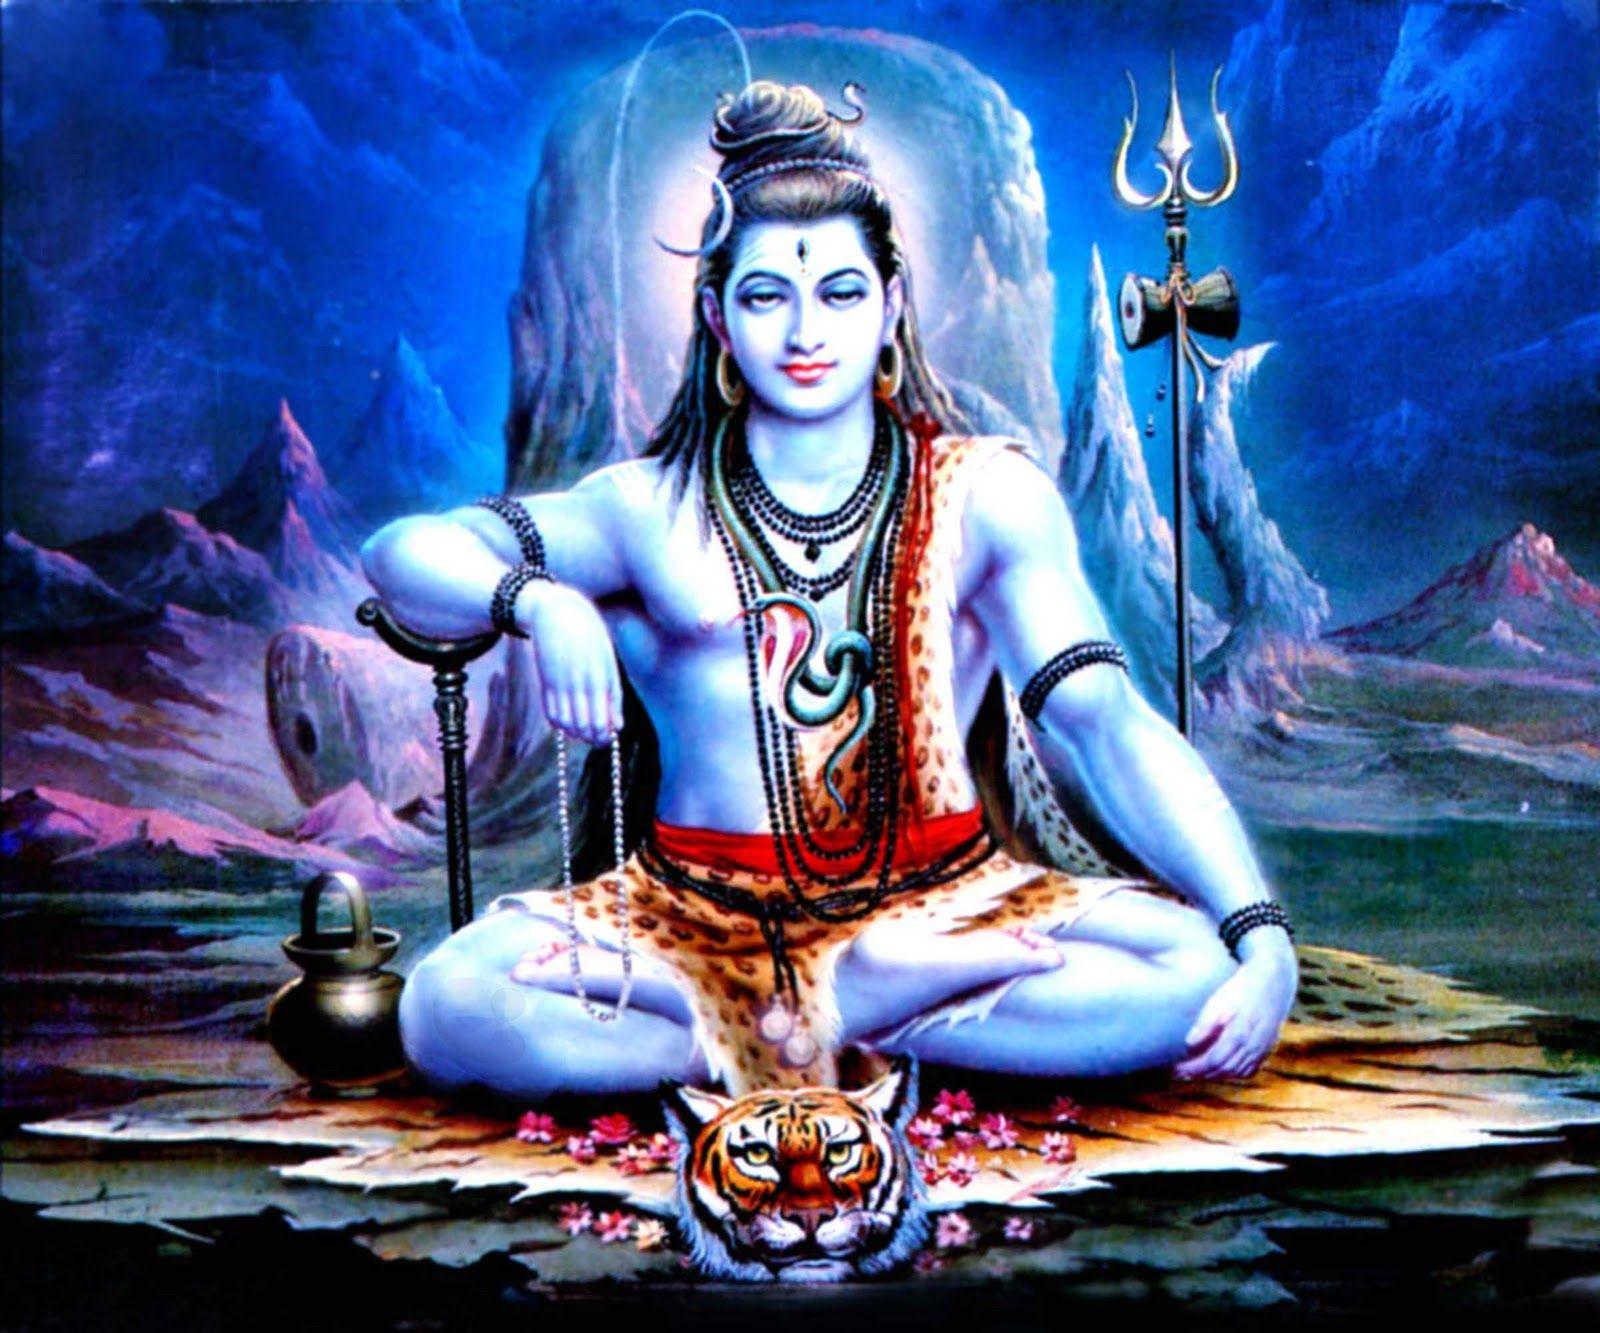 Featured image of post Lord Shiva Hd Wallpapers For Laptop 1920X1080 Free Download / Download mighty god lord shiva hd mahadev wallpaper from the above hd widescreen 4k 5k 8k ultra hd resolutions for desktops laptops, notebook, apple iphone &amp; ipad, android mobiles &amp; tablets.